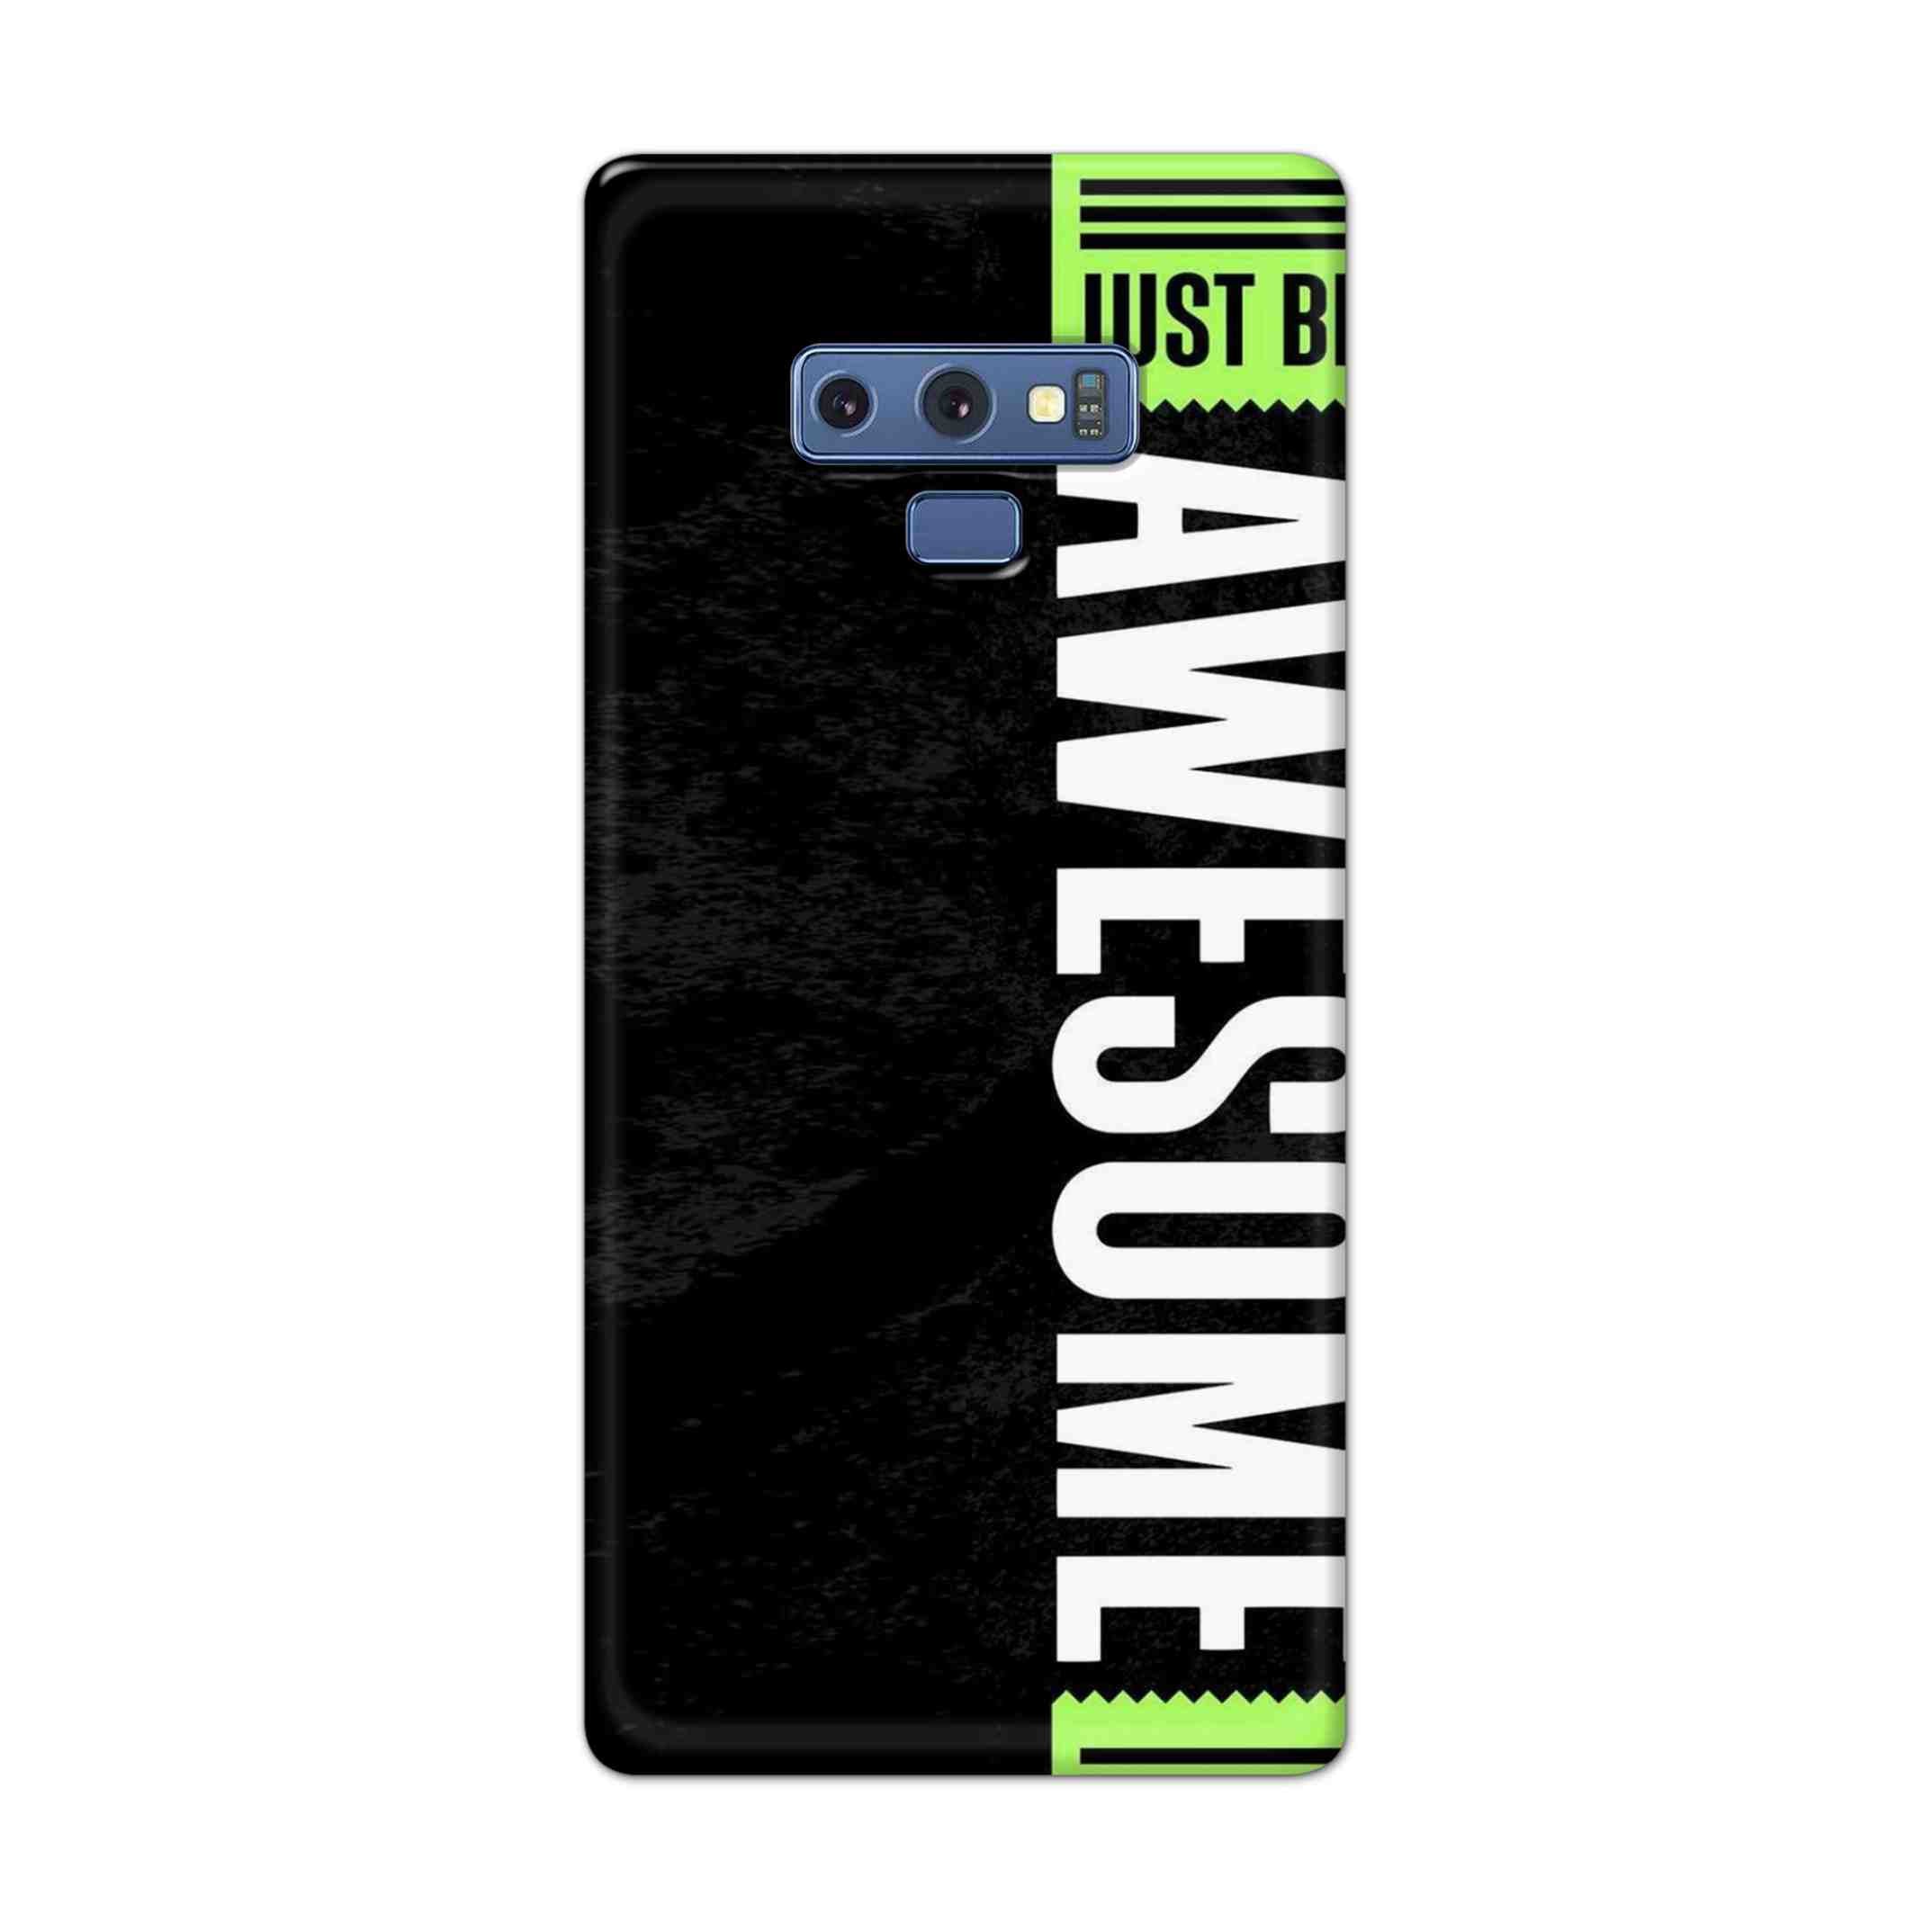 Buy Awesome Street Hard Back Mobile Phone Case Cover For Samsung Galaxy Note 9 Online